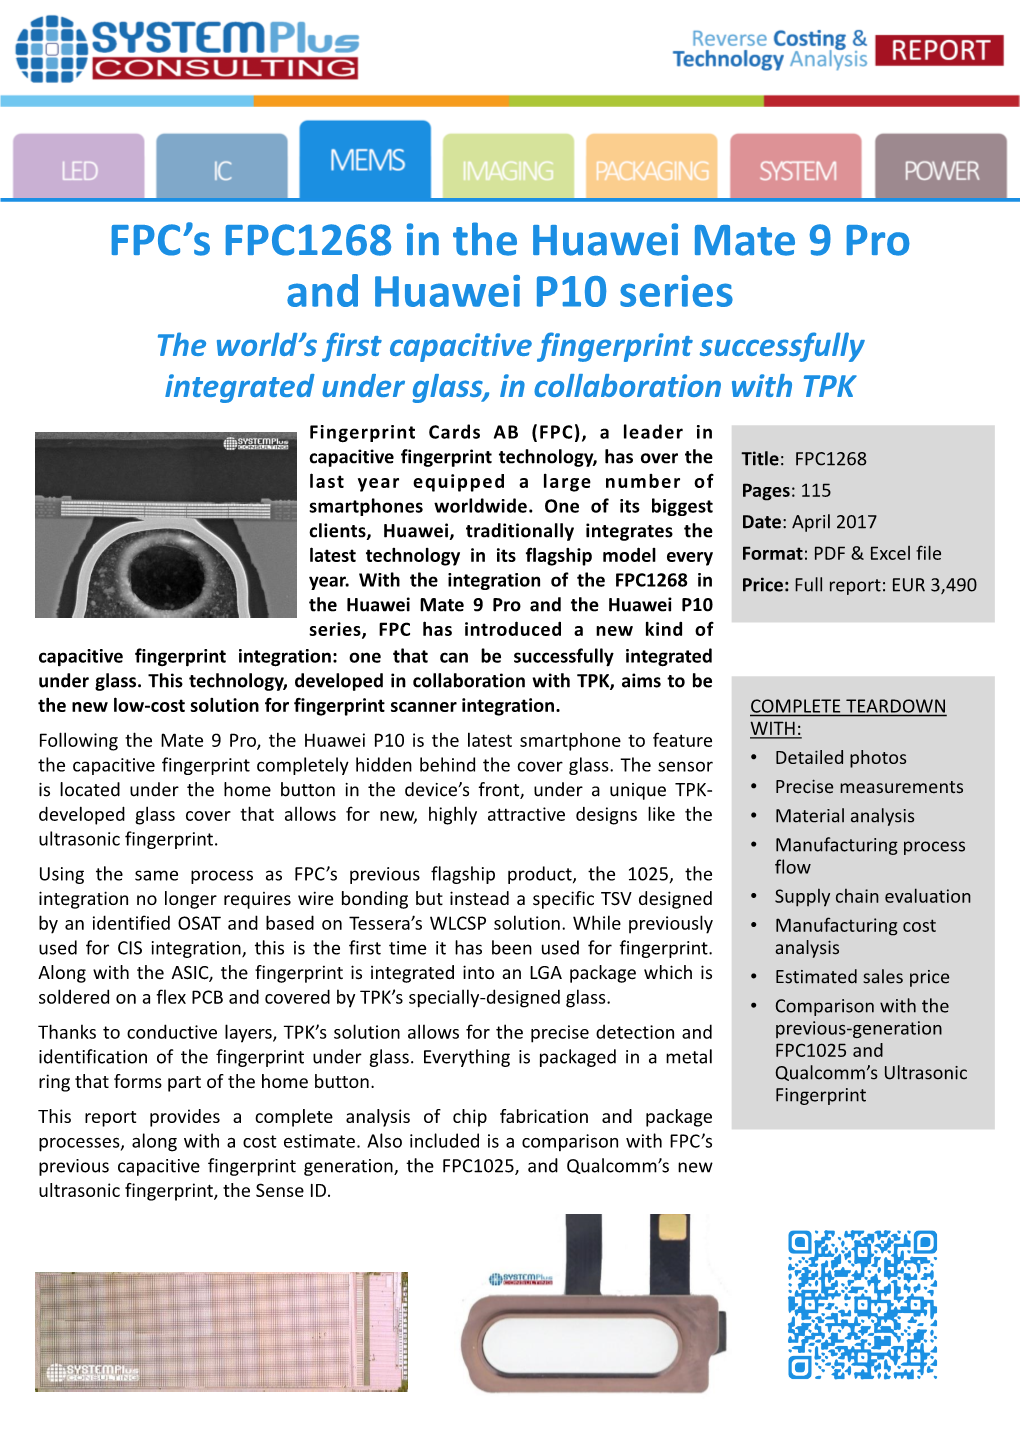 FPC's FPC1268 in the Huawei Mate 9 Pro and Huawei P10 Series